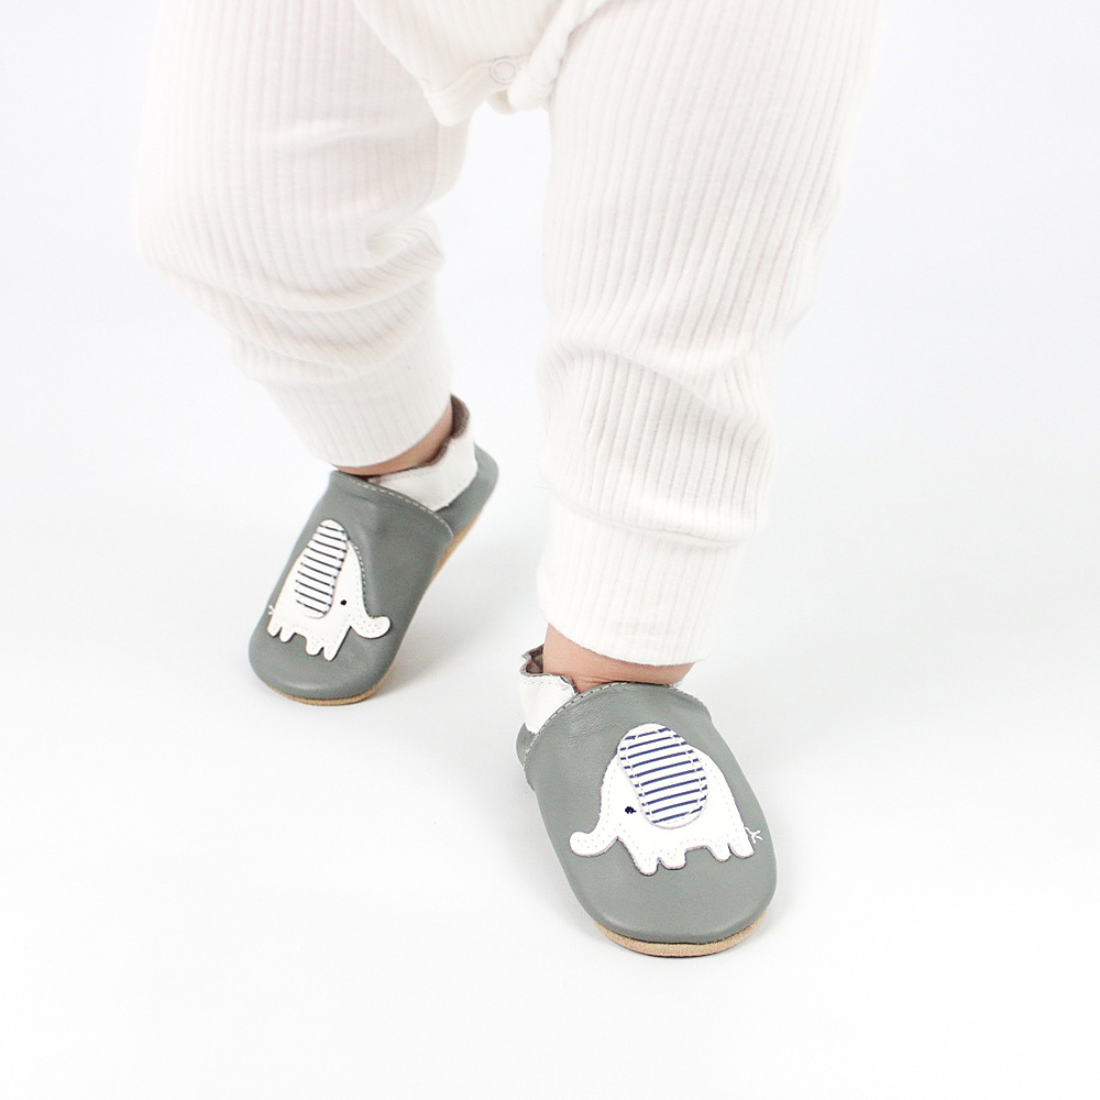 Baby taking first steps wearing Dotty Fish soft leather baby shoes with elephant motif